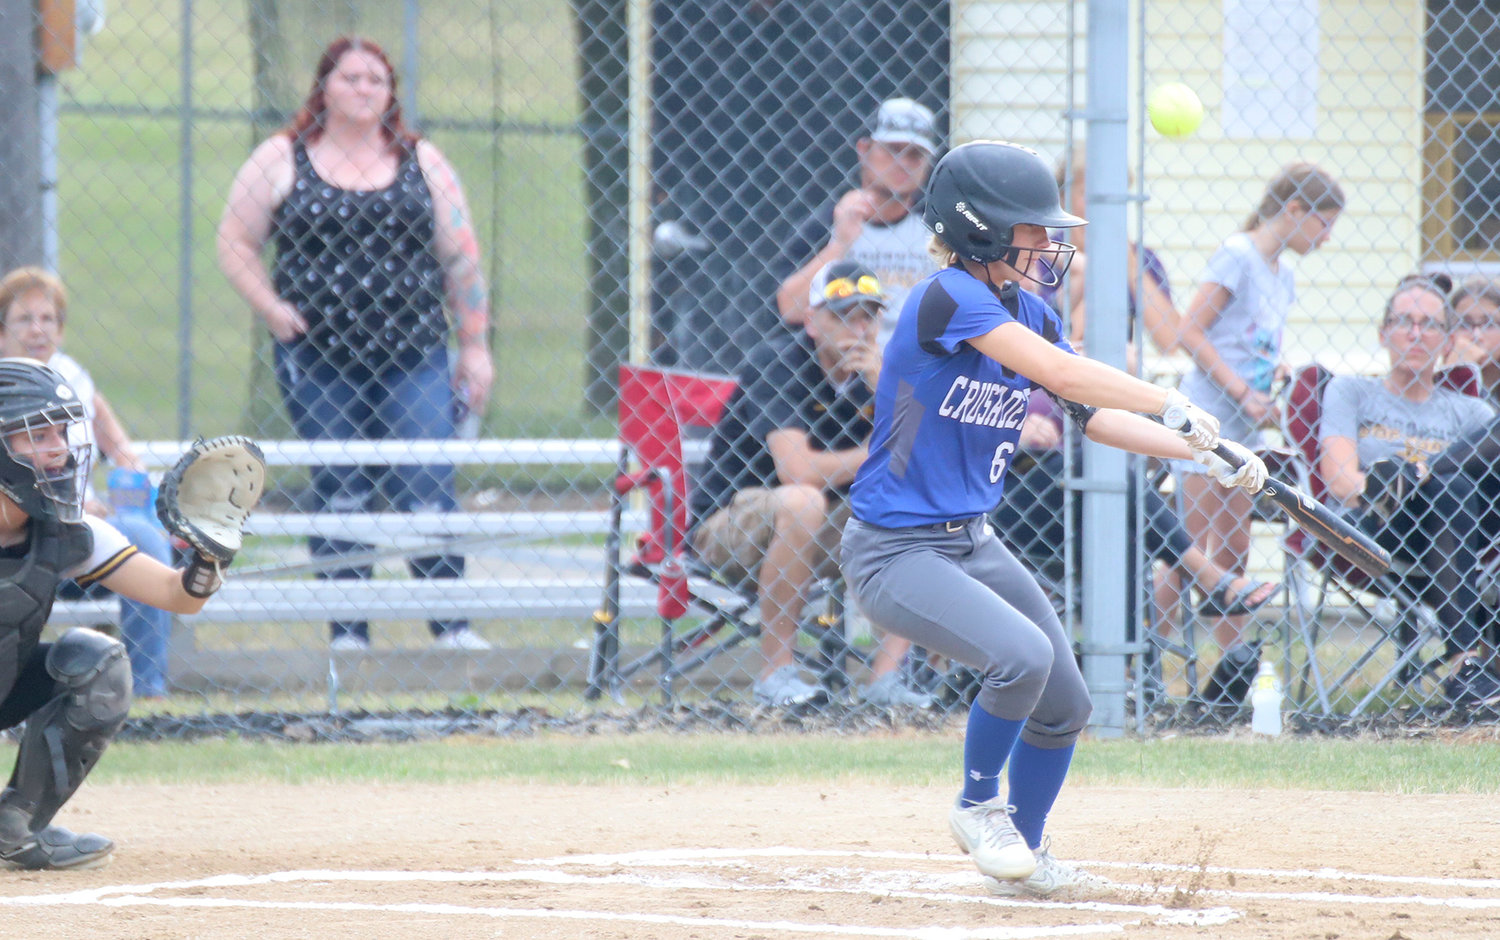 HTC's Anna Sobczak tries to get a drag bunt down in the third inning but pops the ball back foul. The Crusaders fell 11-1 to Sigourney to end their season at 10-11.